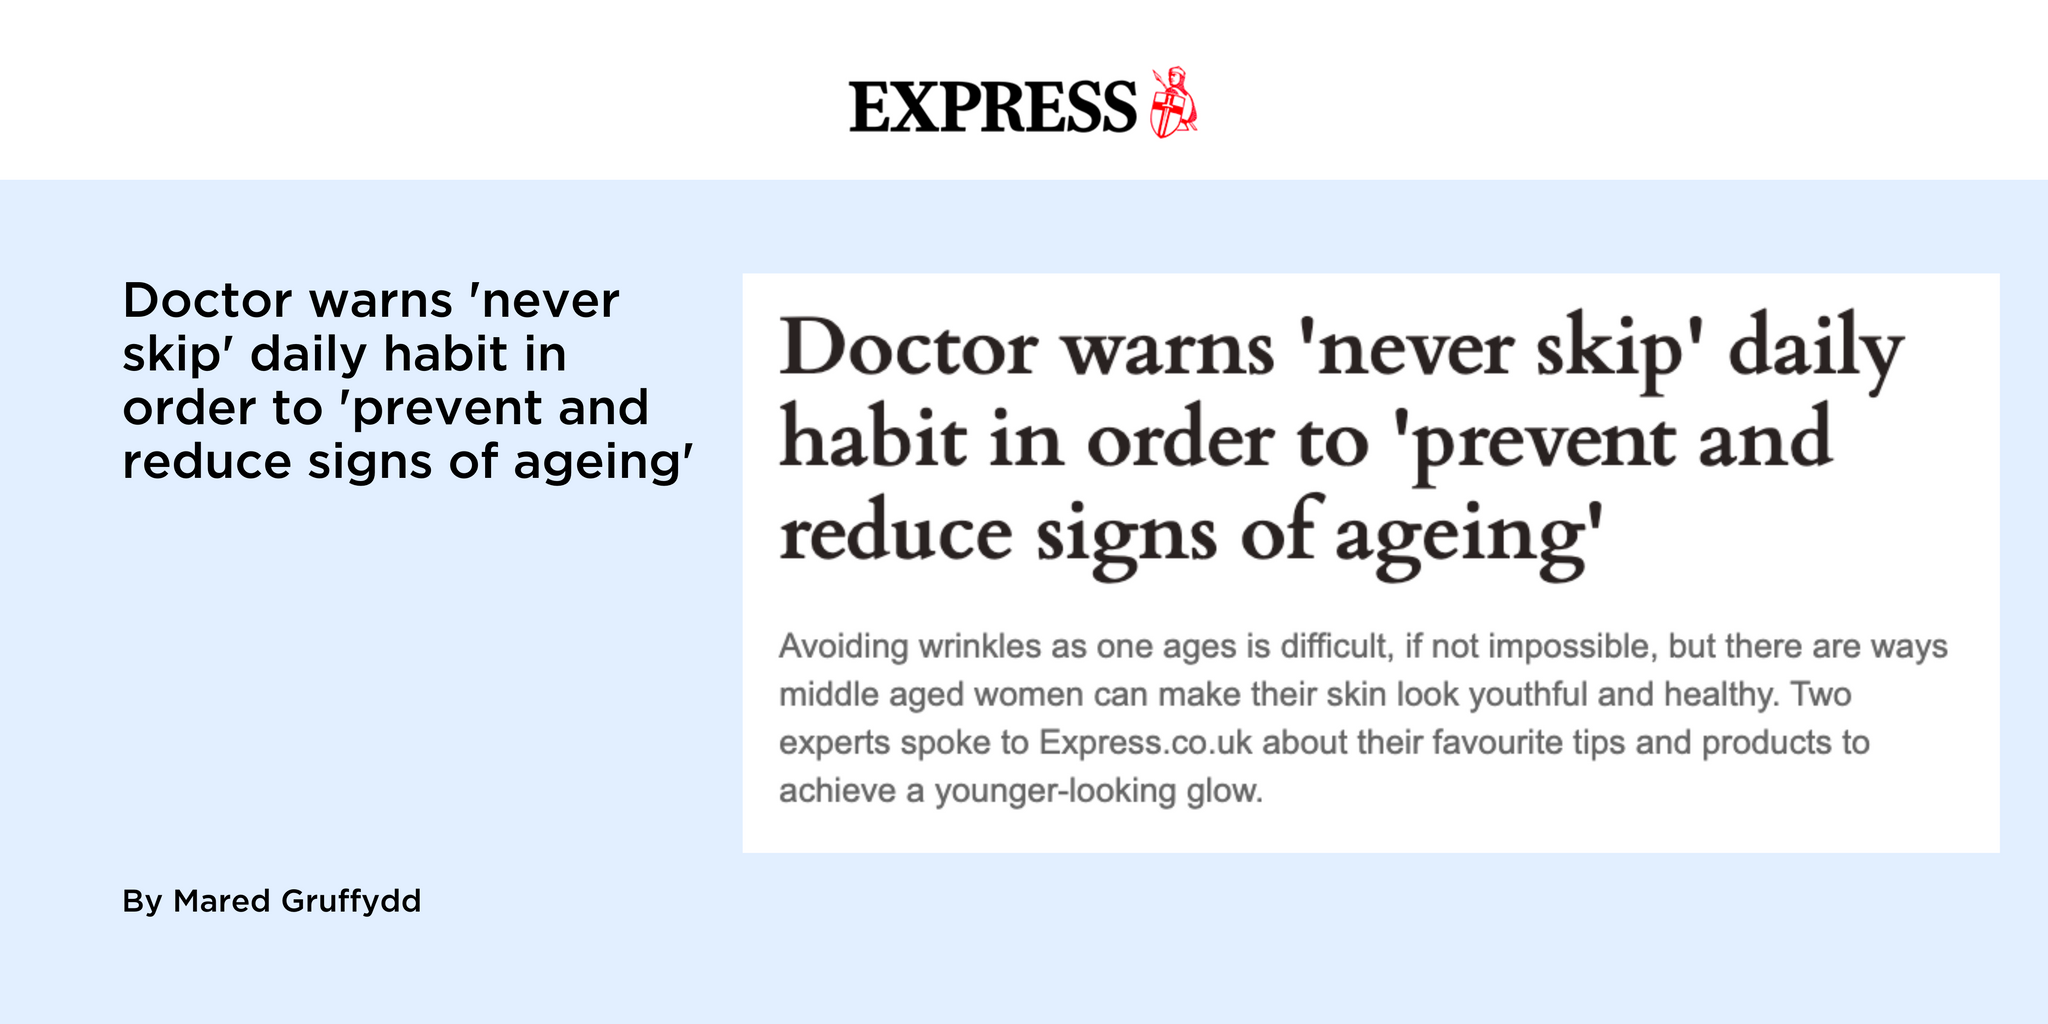 Doctor warns 'never skip' daily habit in order to 'prevent and reduce signs of ageing'